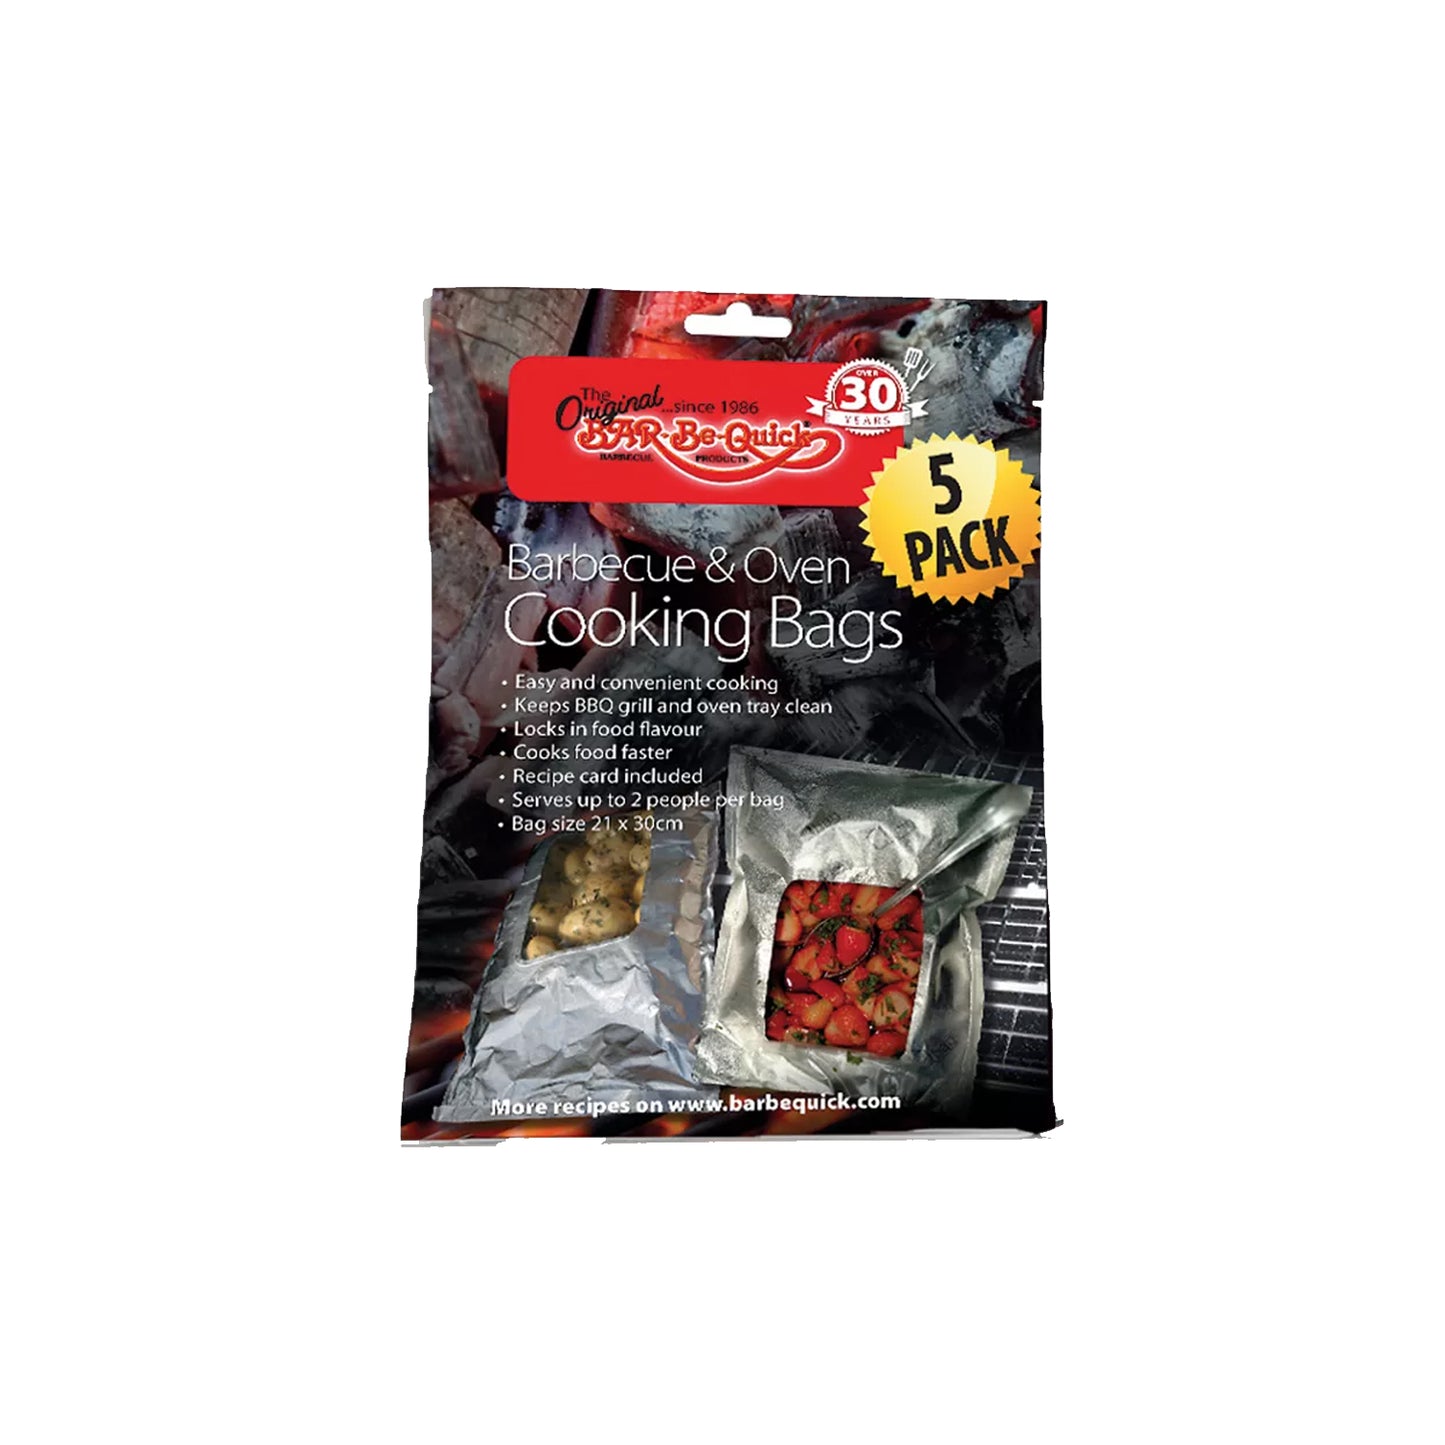 Bar-Be-Quick Barbecue & Oven Foil Cooking Bags